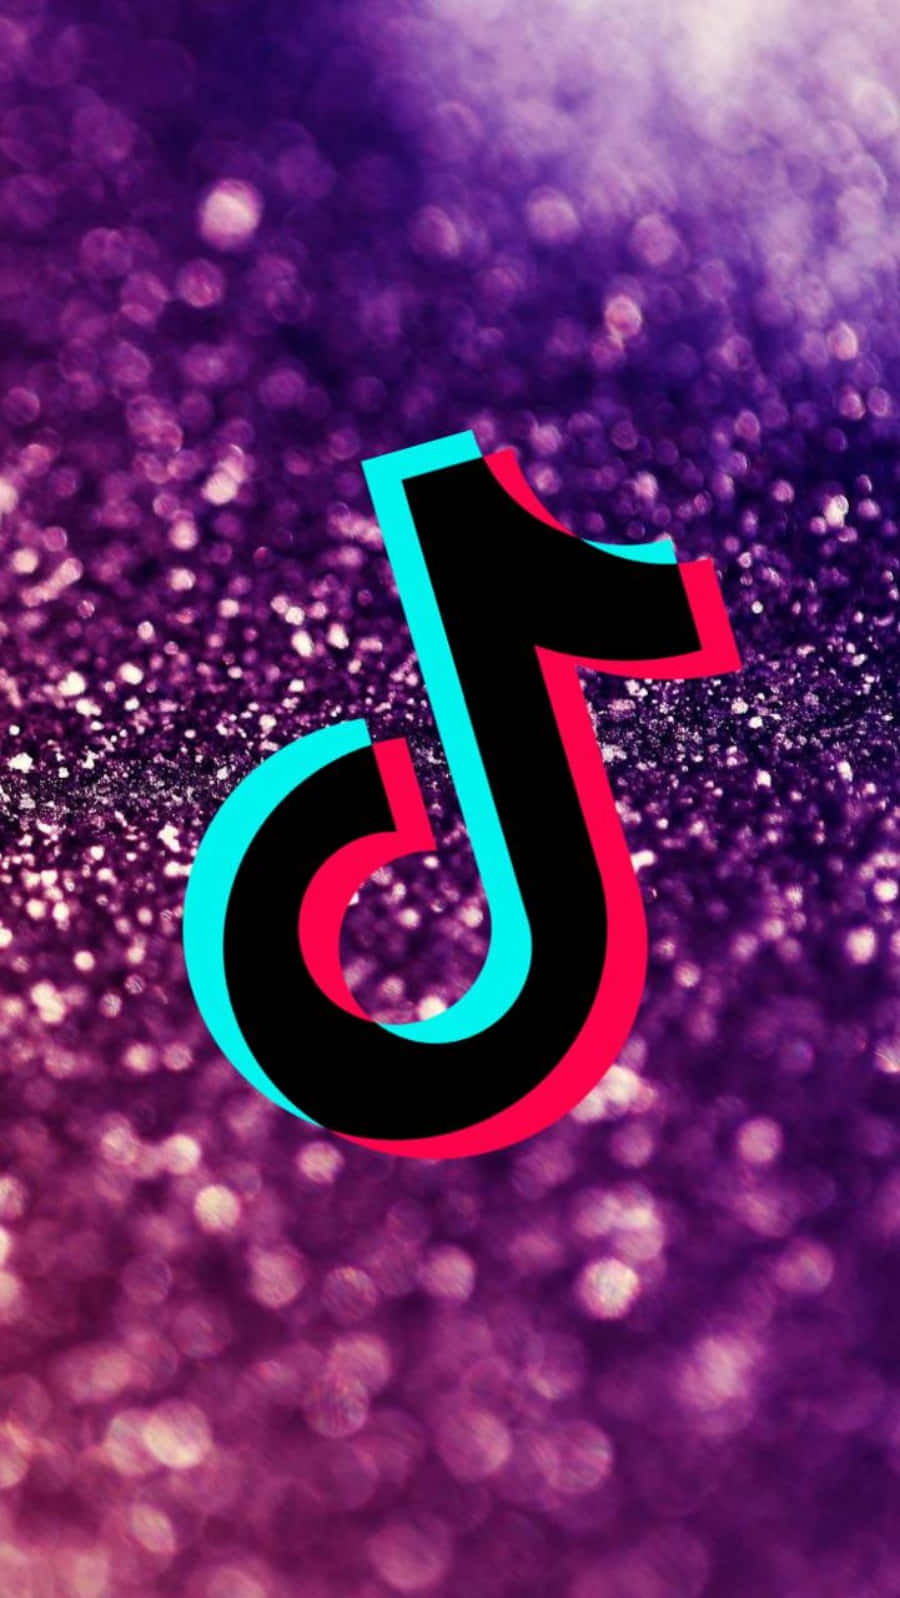 Get Ready to Share Unique Videos on TikTok